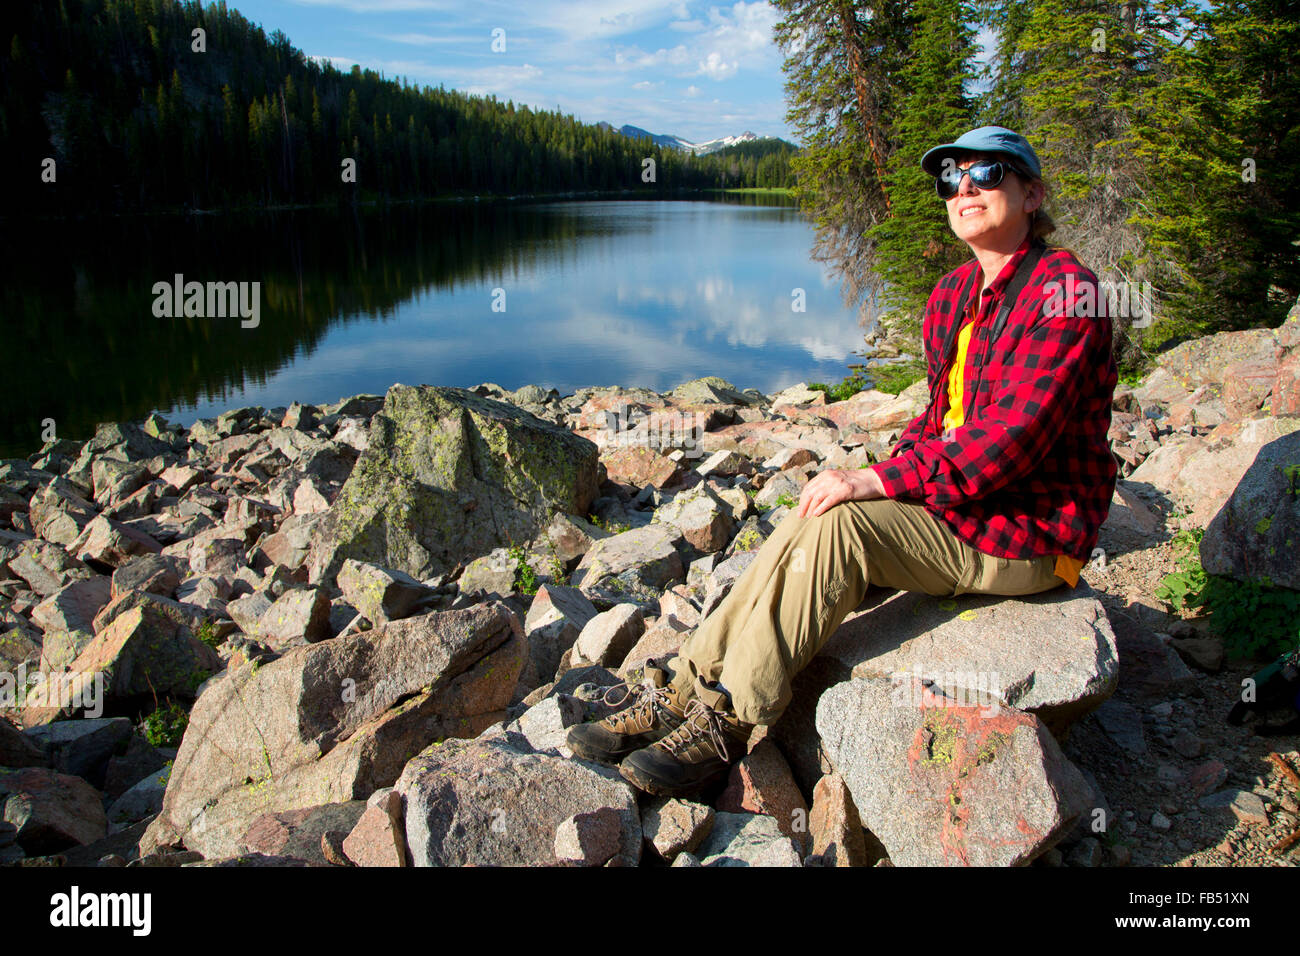 Hiker at Lady of the Lake, Absaroka Beartooth Wilderness, Gallatin National Forest, Montana Stock Photo